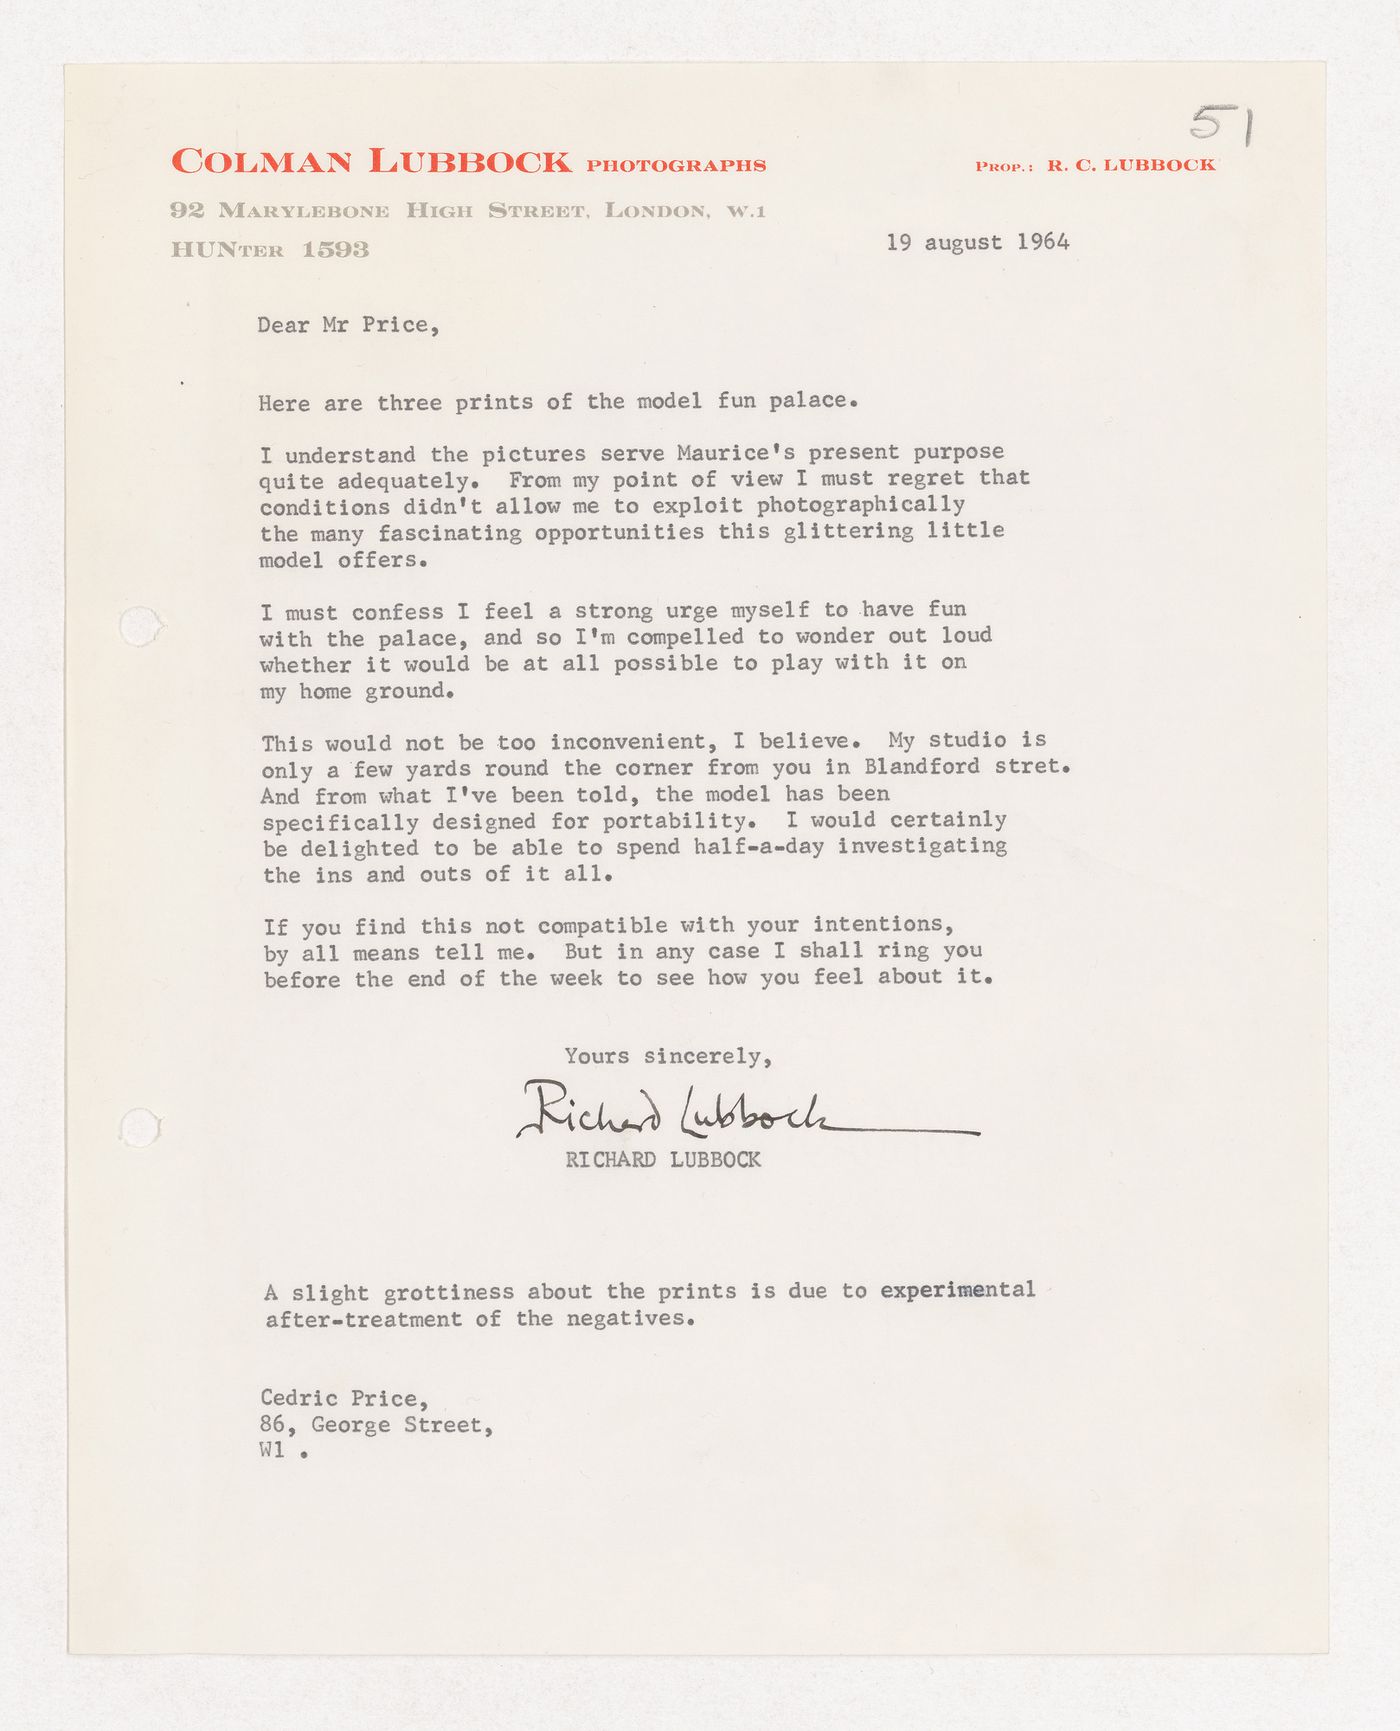 Letter from Richard Lubbock of Colman Lubbock Photographs to Cedric Price regarding photos of the Fun Palace model